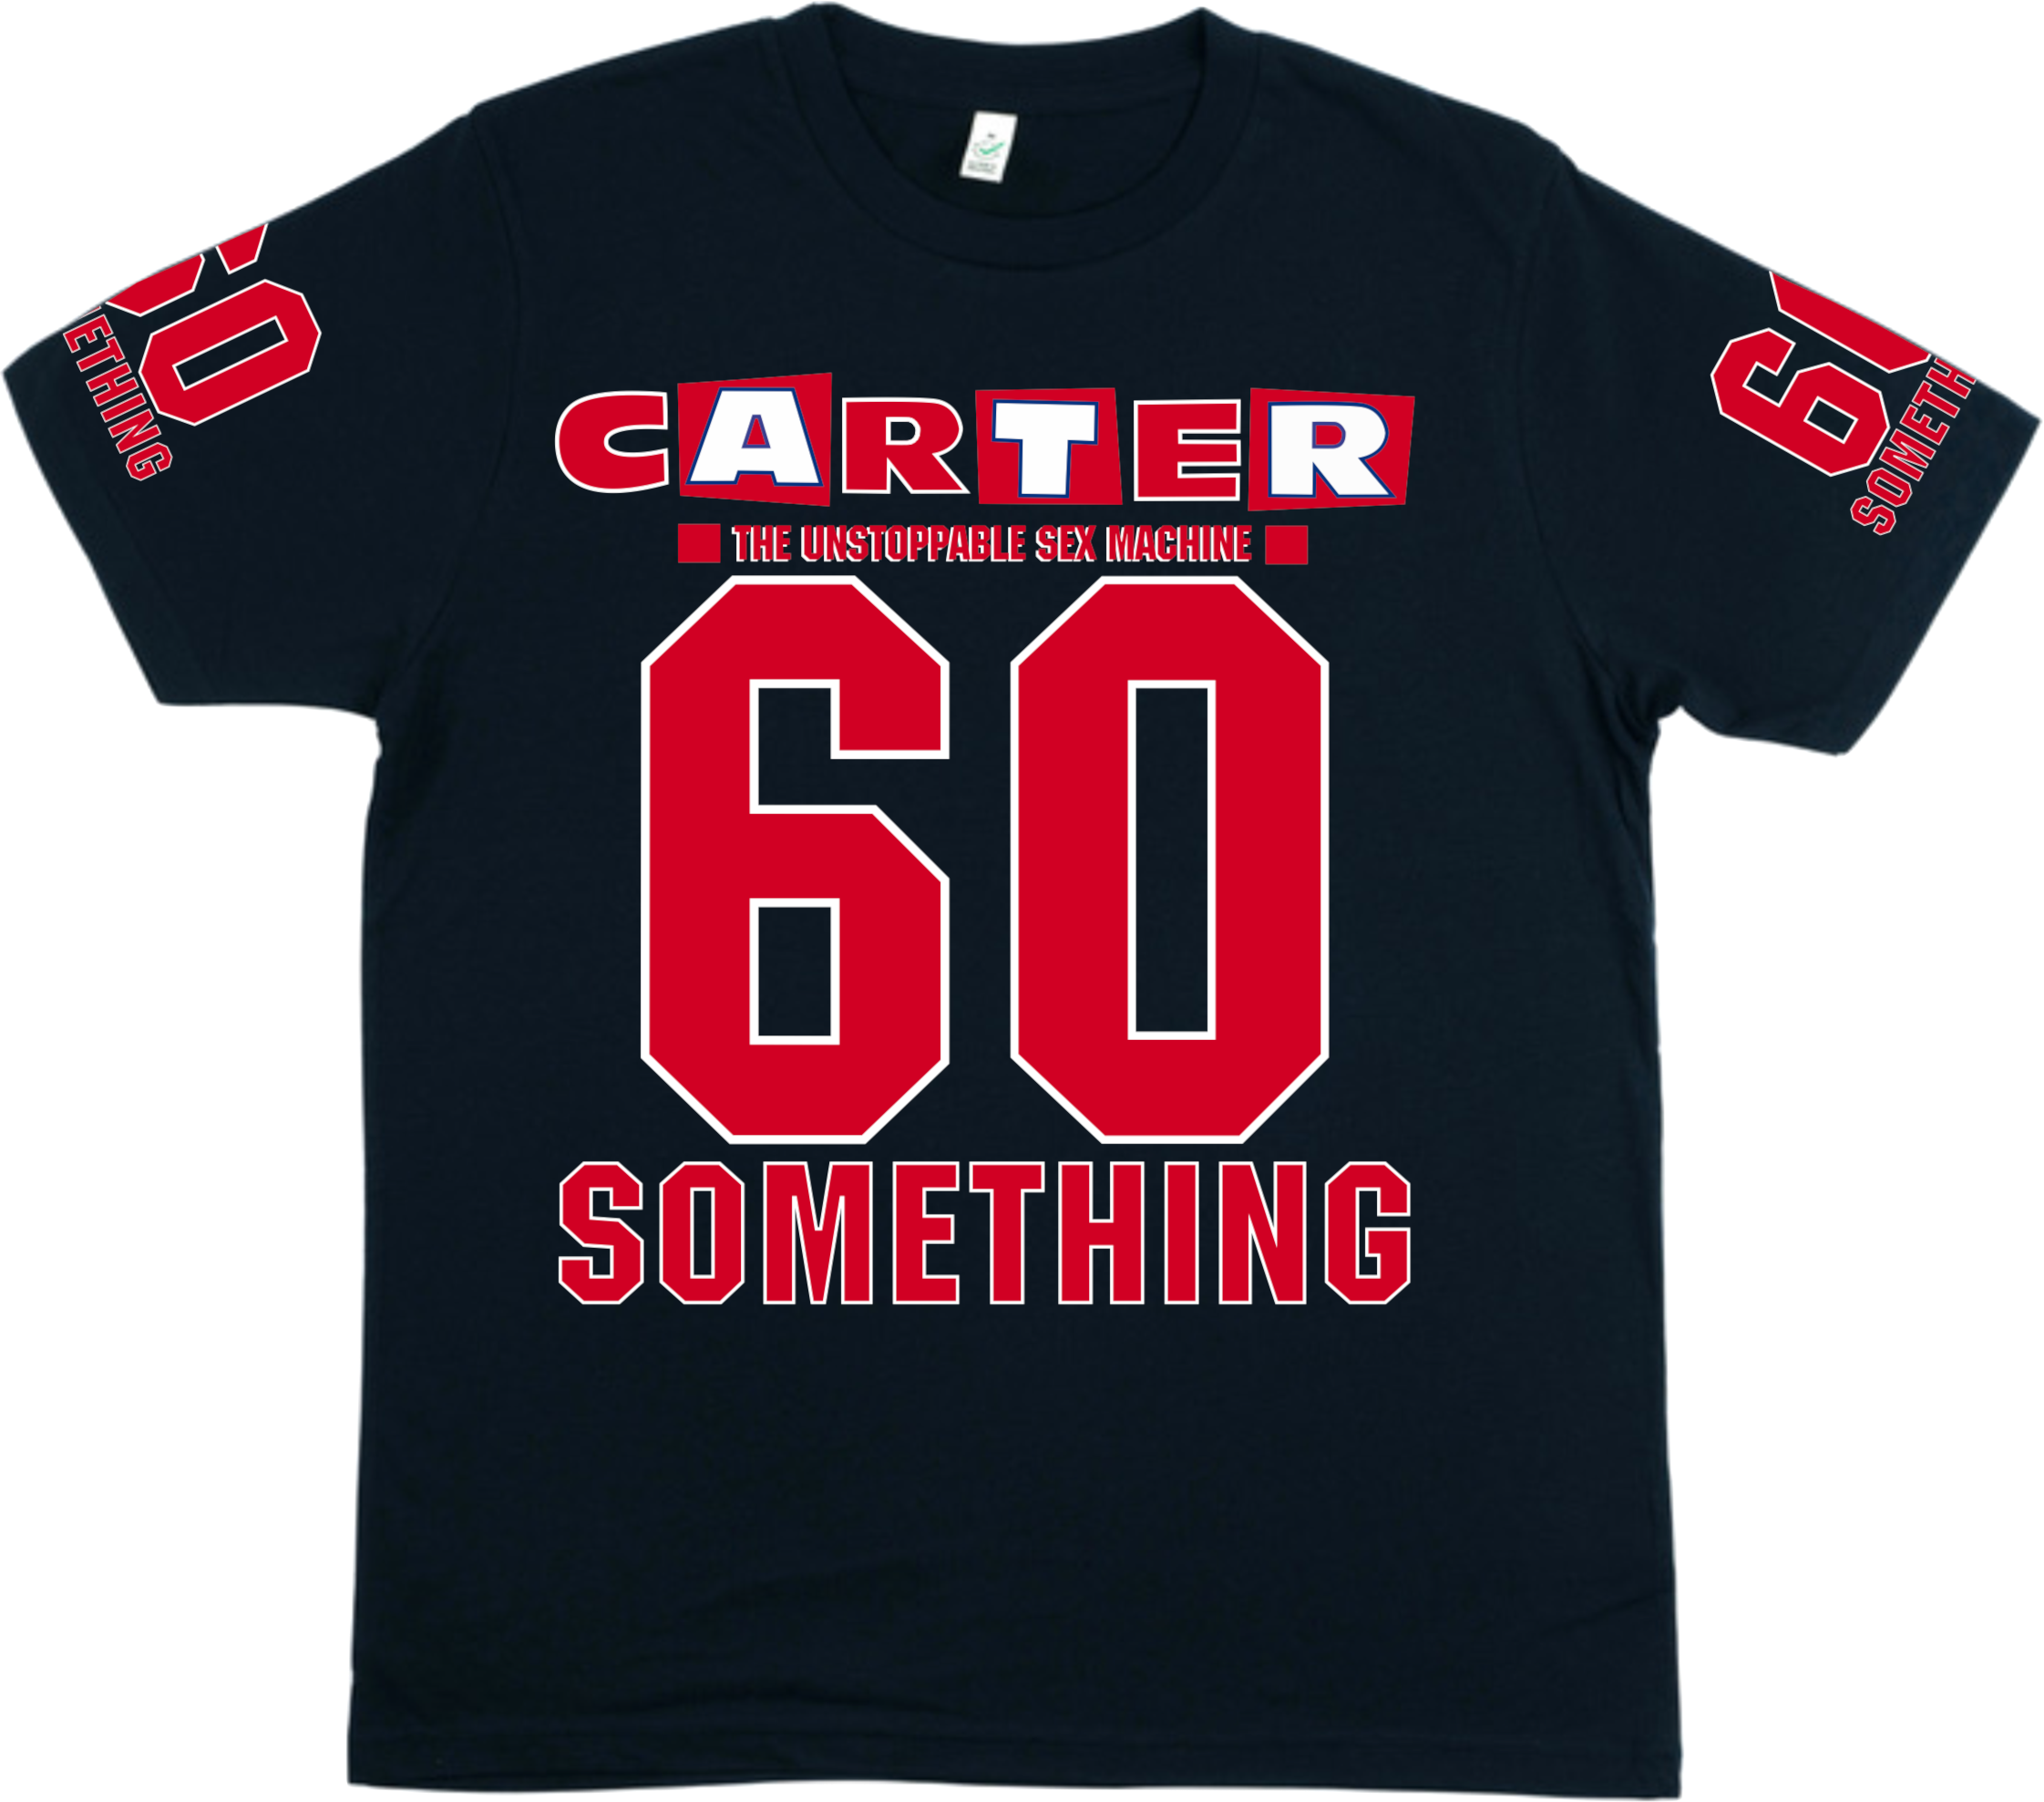 60 Something Organic T-Shirt — Carter The Unstoppable Sex Machine